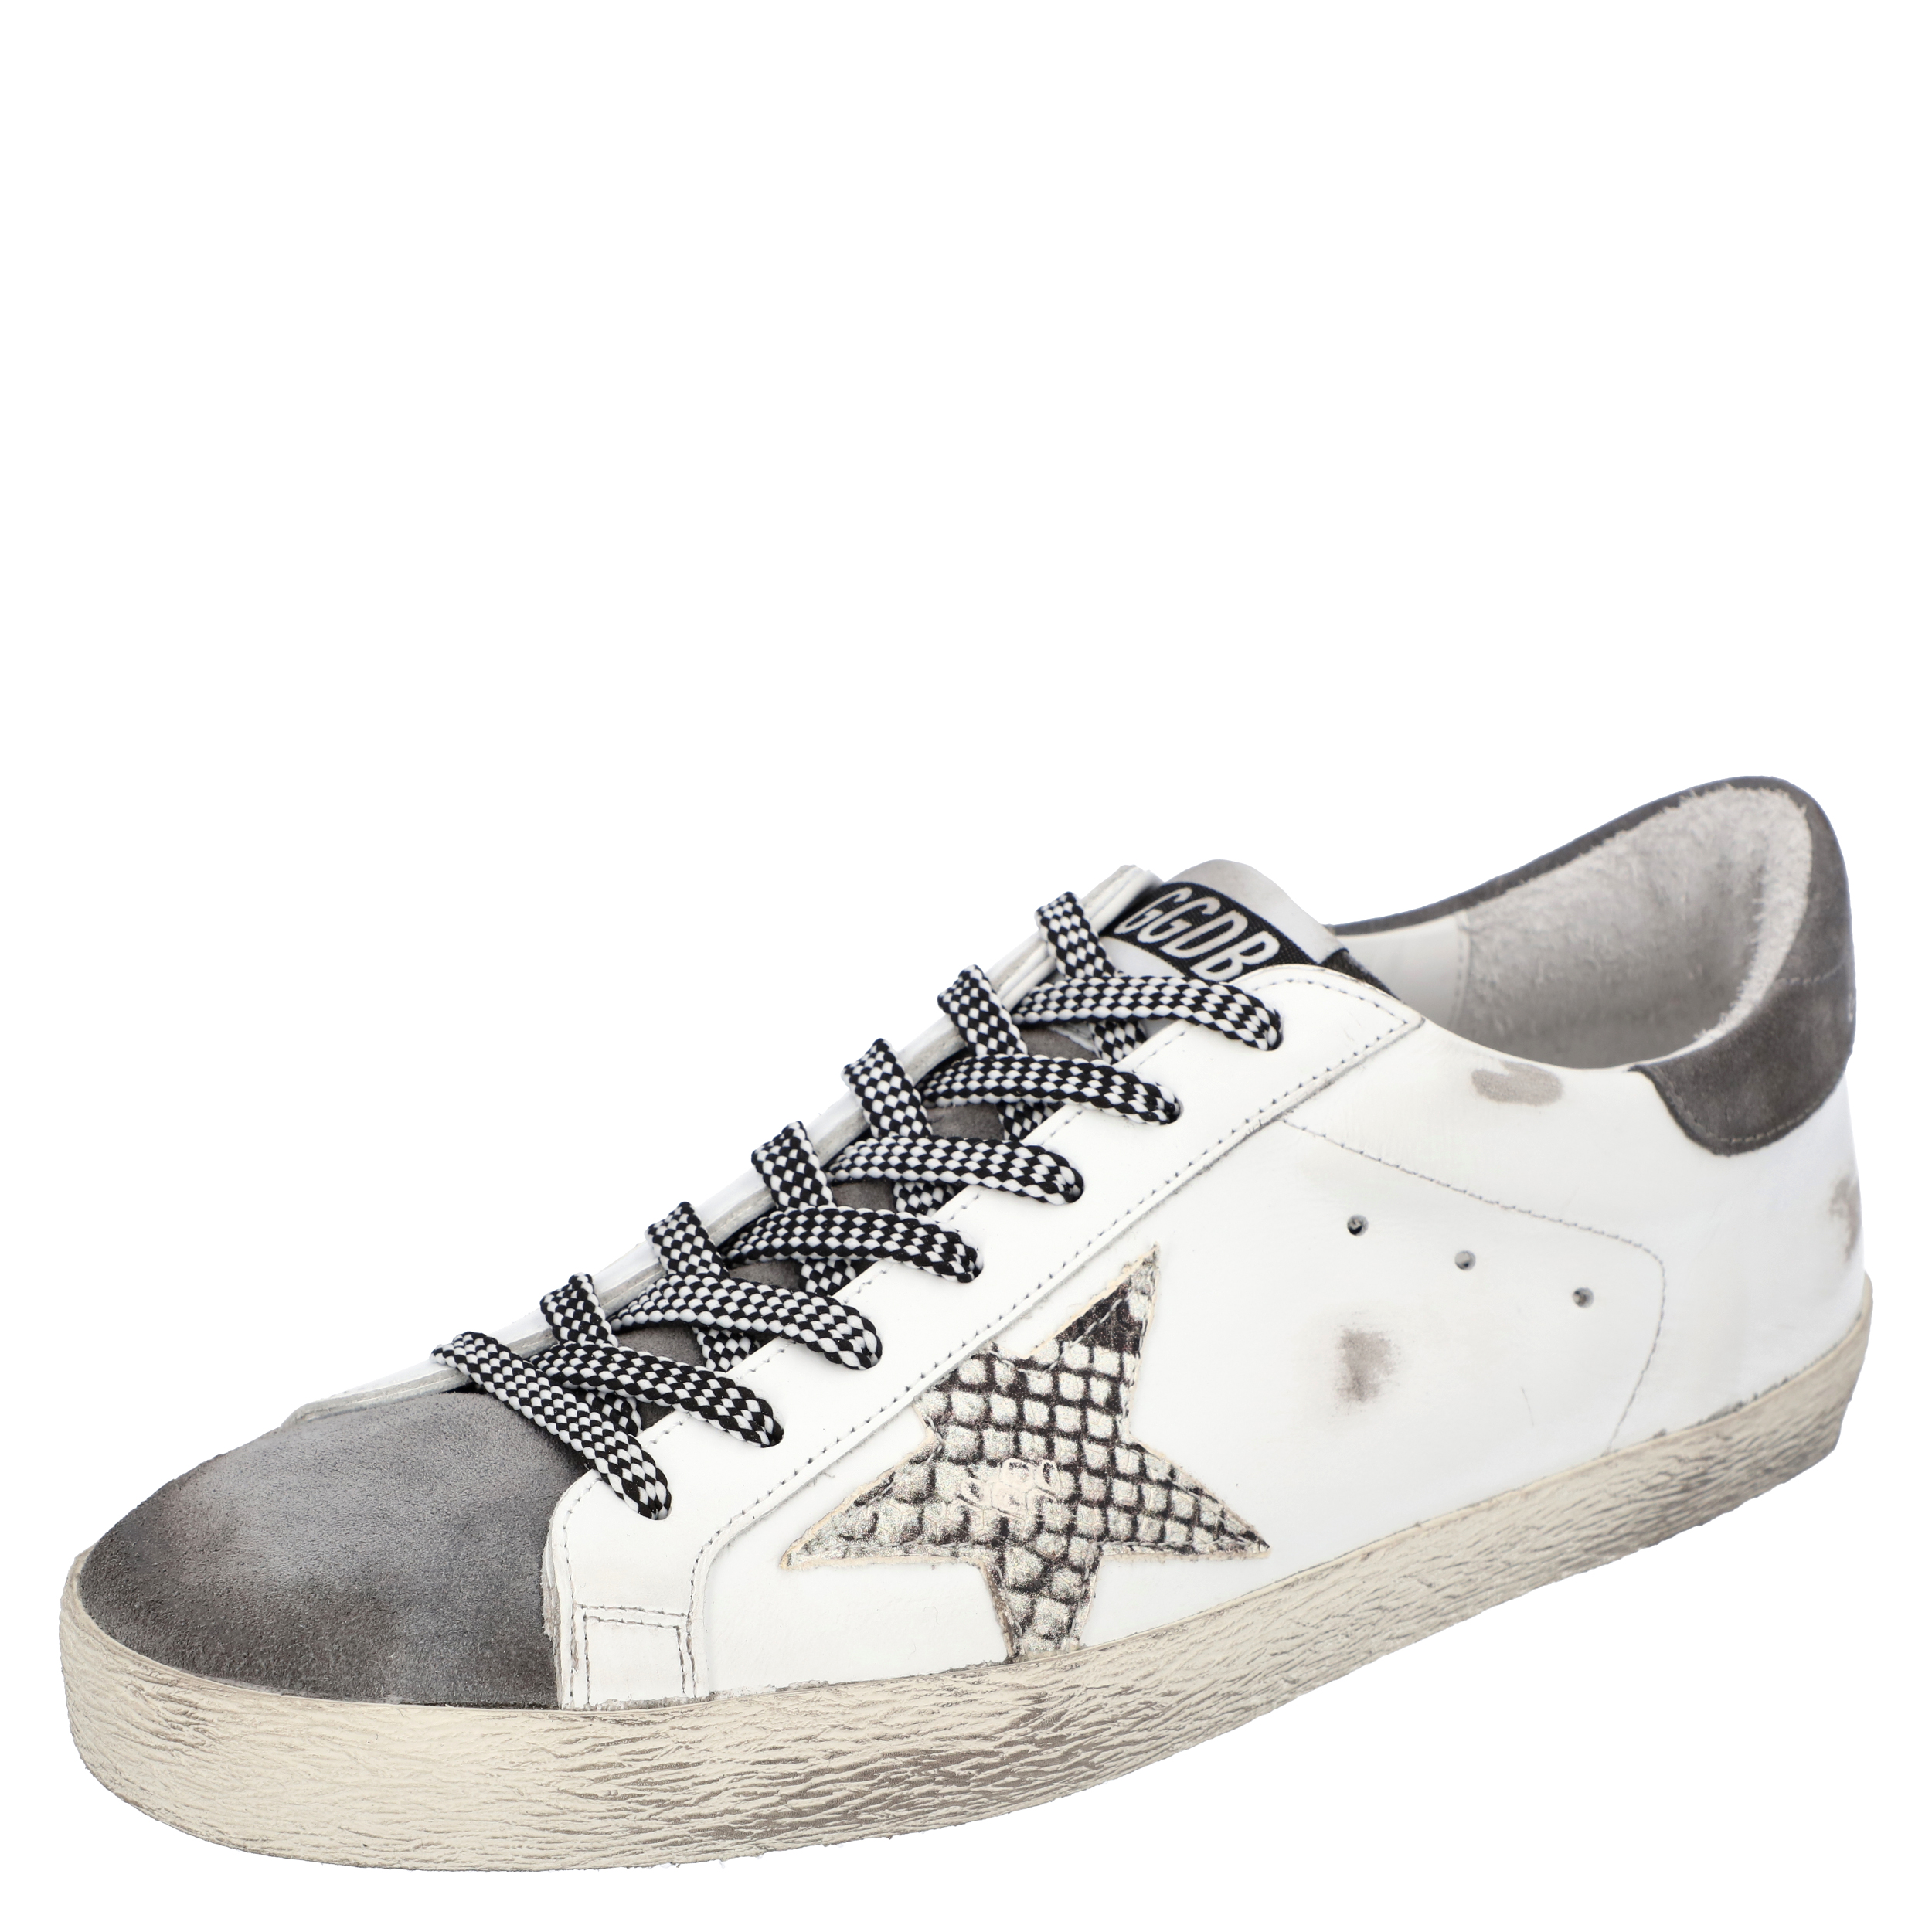 Golden Goose White/Grey Leather Superstar Sneakers Size EU 42